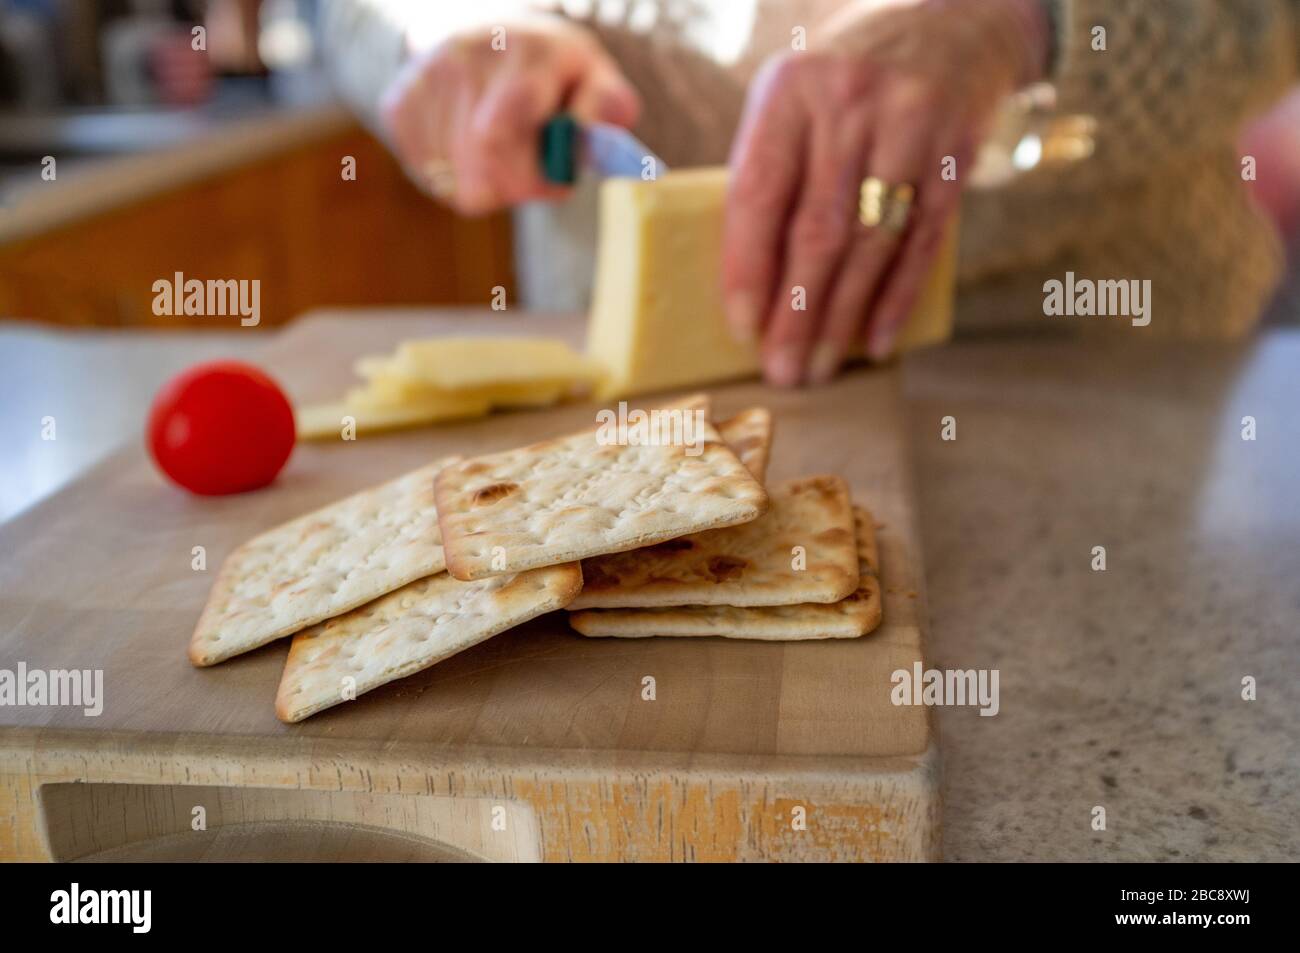 Crackers with cheese being sliced in the background Stock Photo